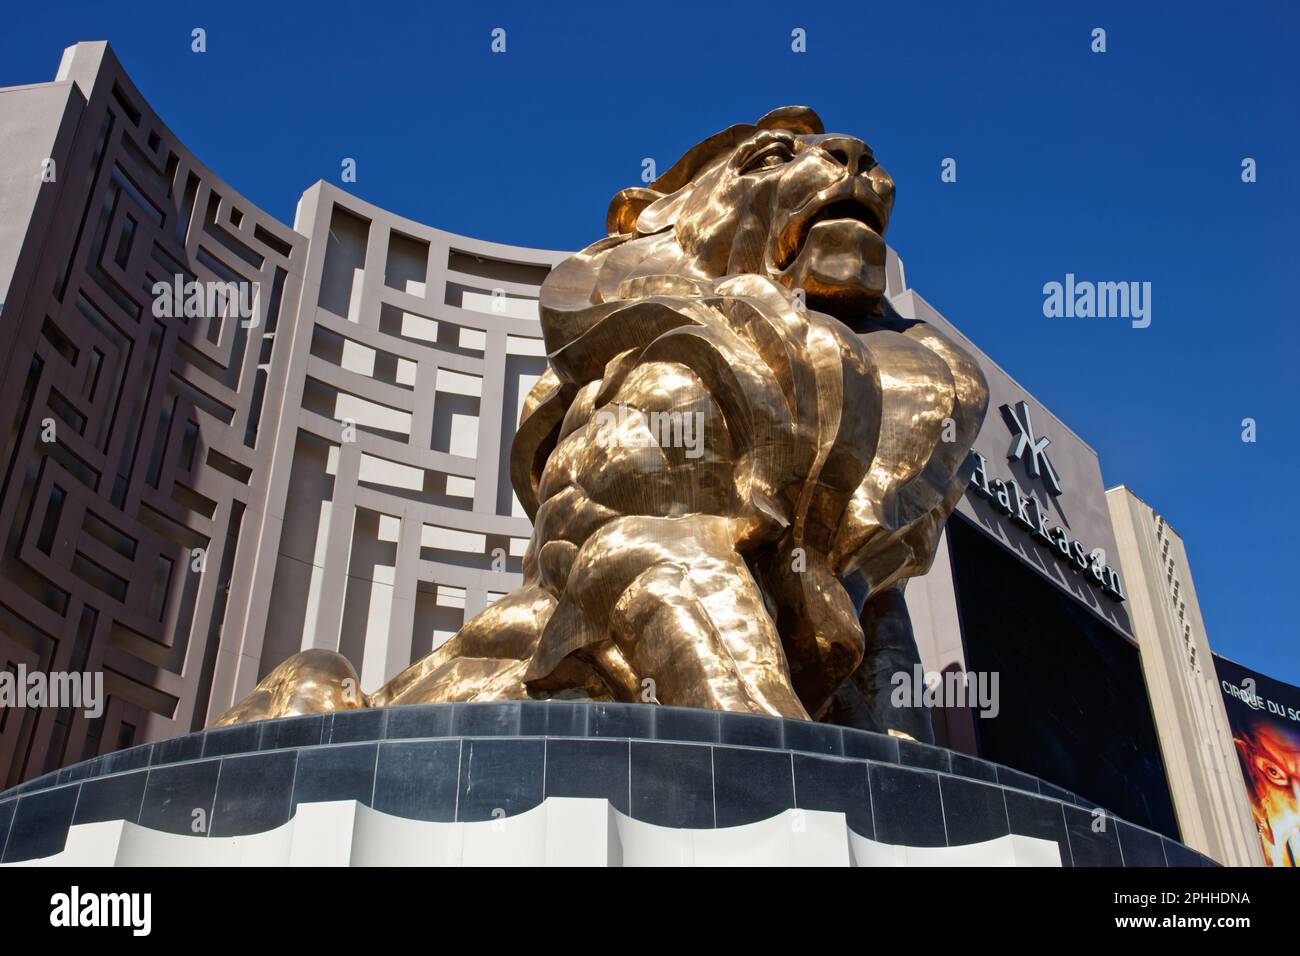 The statue of Leo, the MGM lion in Las Vegas, Nevada, USA Stock Photo